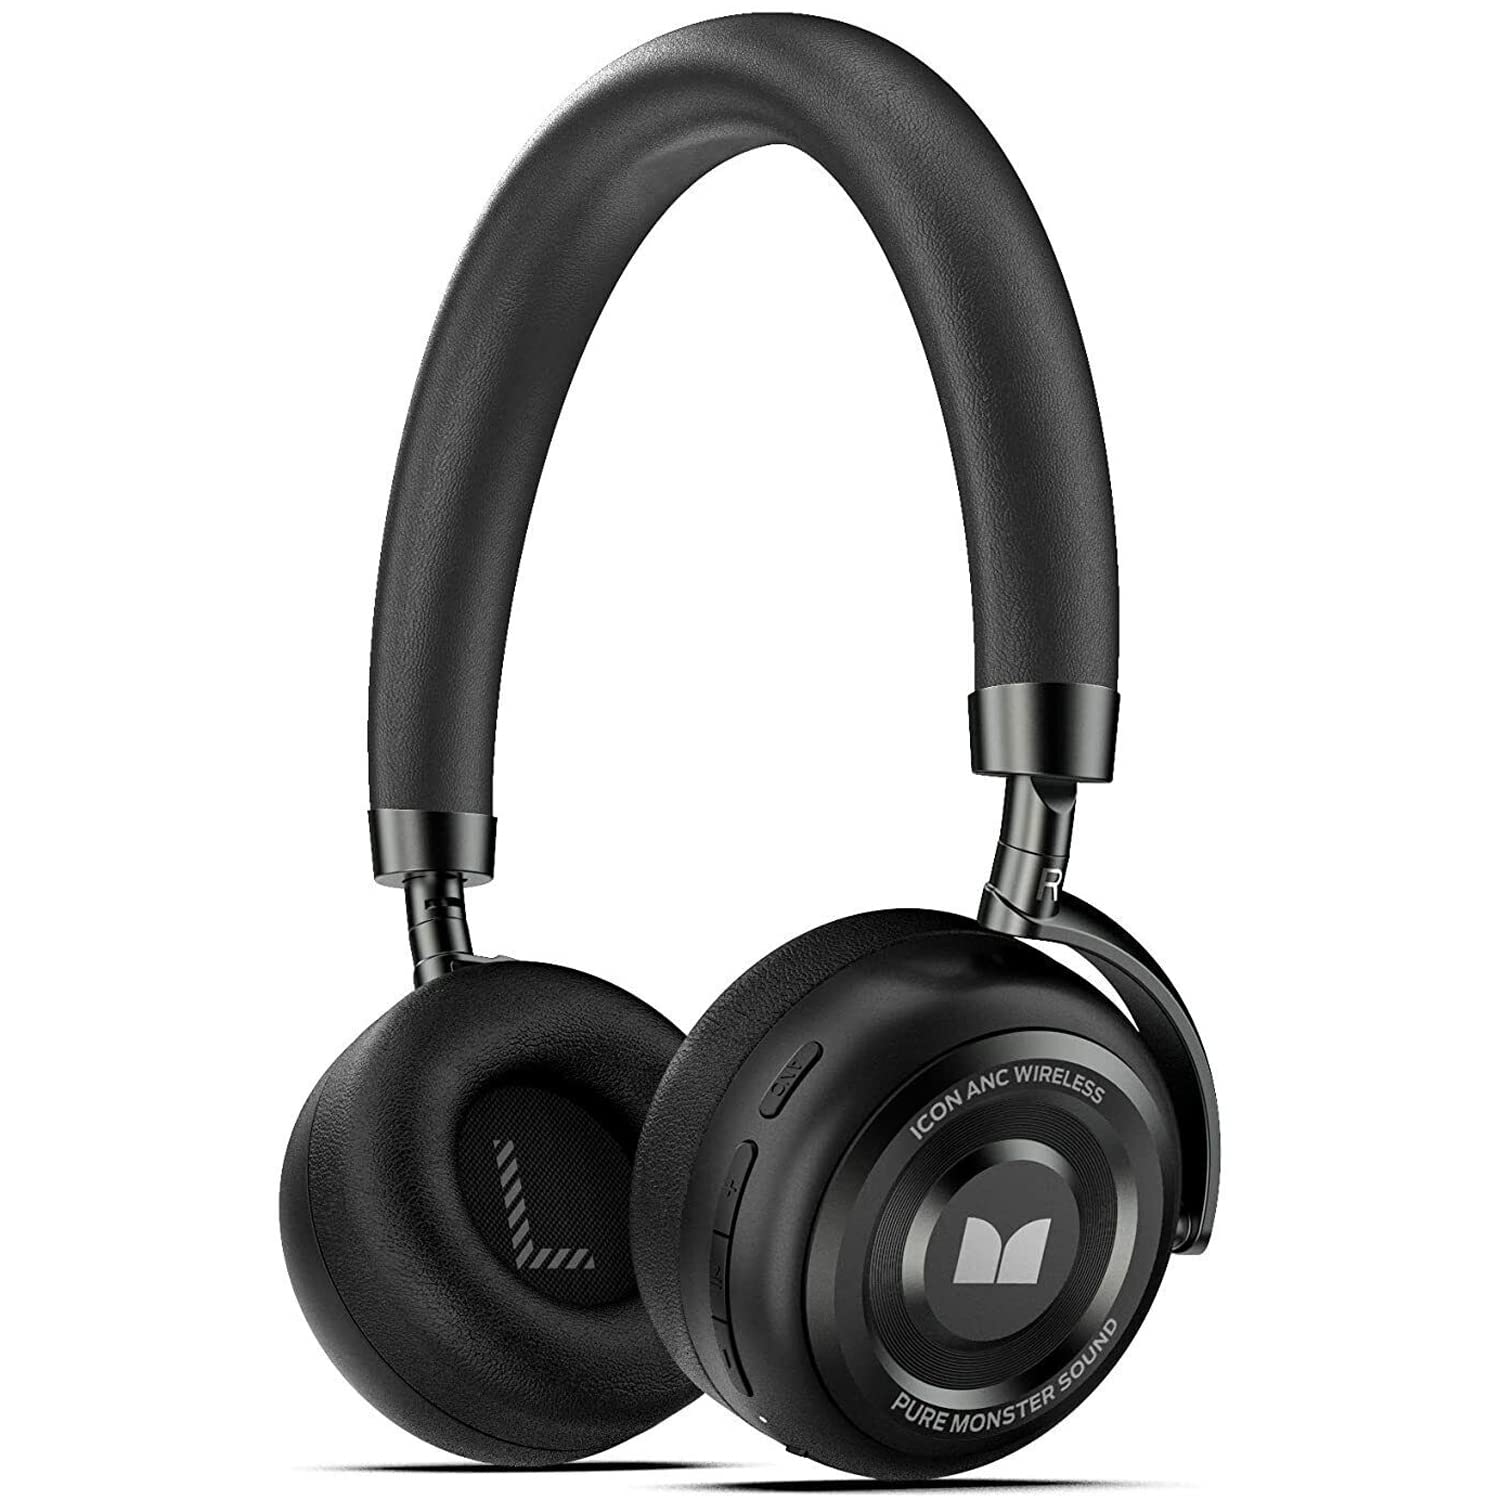 Book Cover Active Noise Cancelling Headphones, Monster Bluetooth Headphones with Carrying Case, Wireless Headphones with Mic and 30 Hours Playtime for Travel/Work, Black